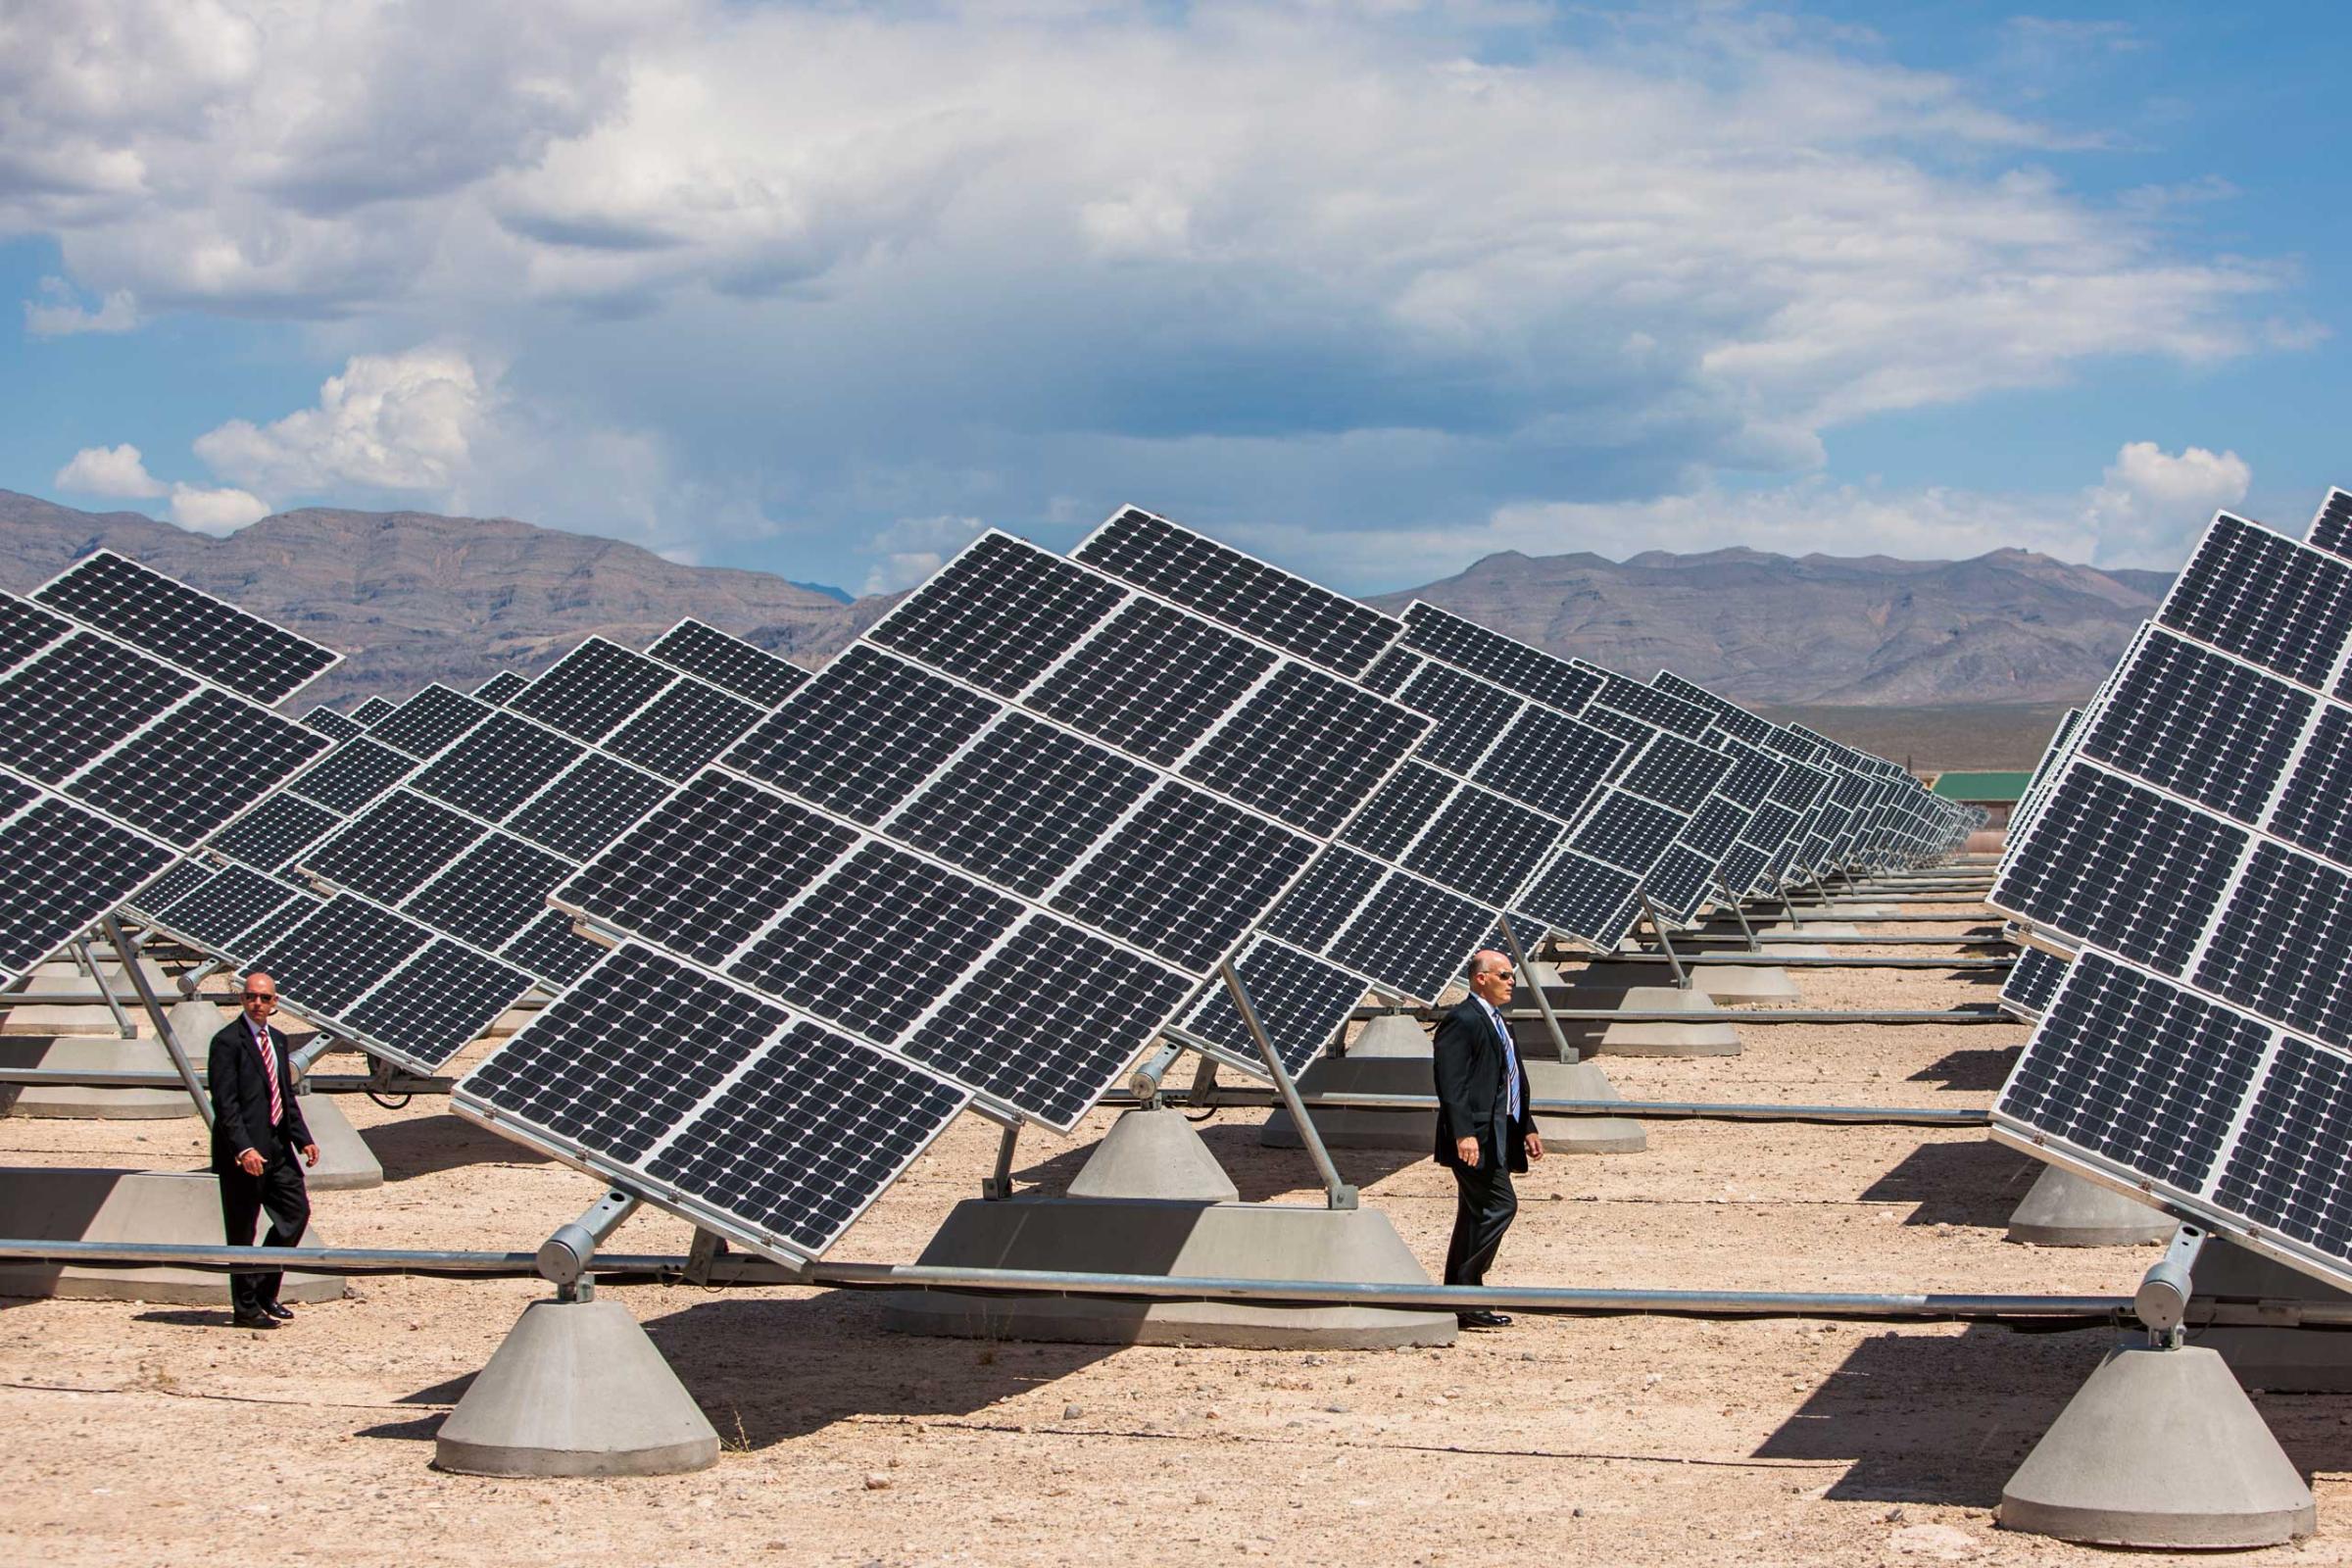 President Barack Obama and Senate Majority Leader Harry Reid of Nev., are accompanied by Col. Howard Belote as they look at solar panels at Nellis Air Force Base in NevadaPhoto by Brooks Kraft/Corbis